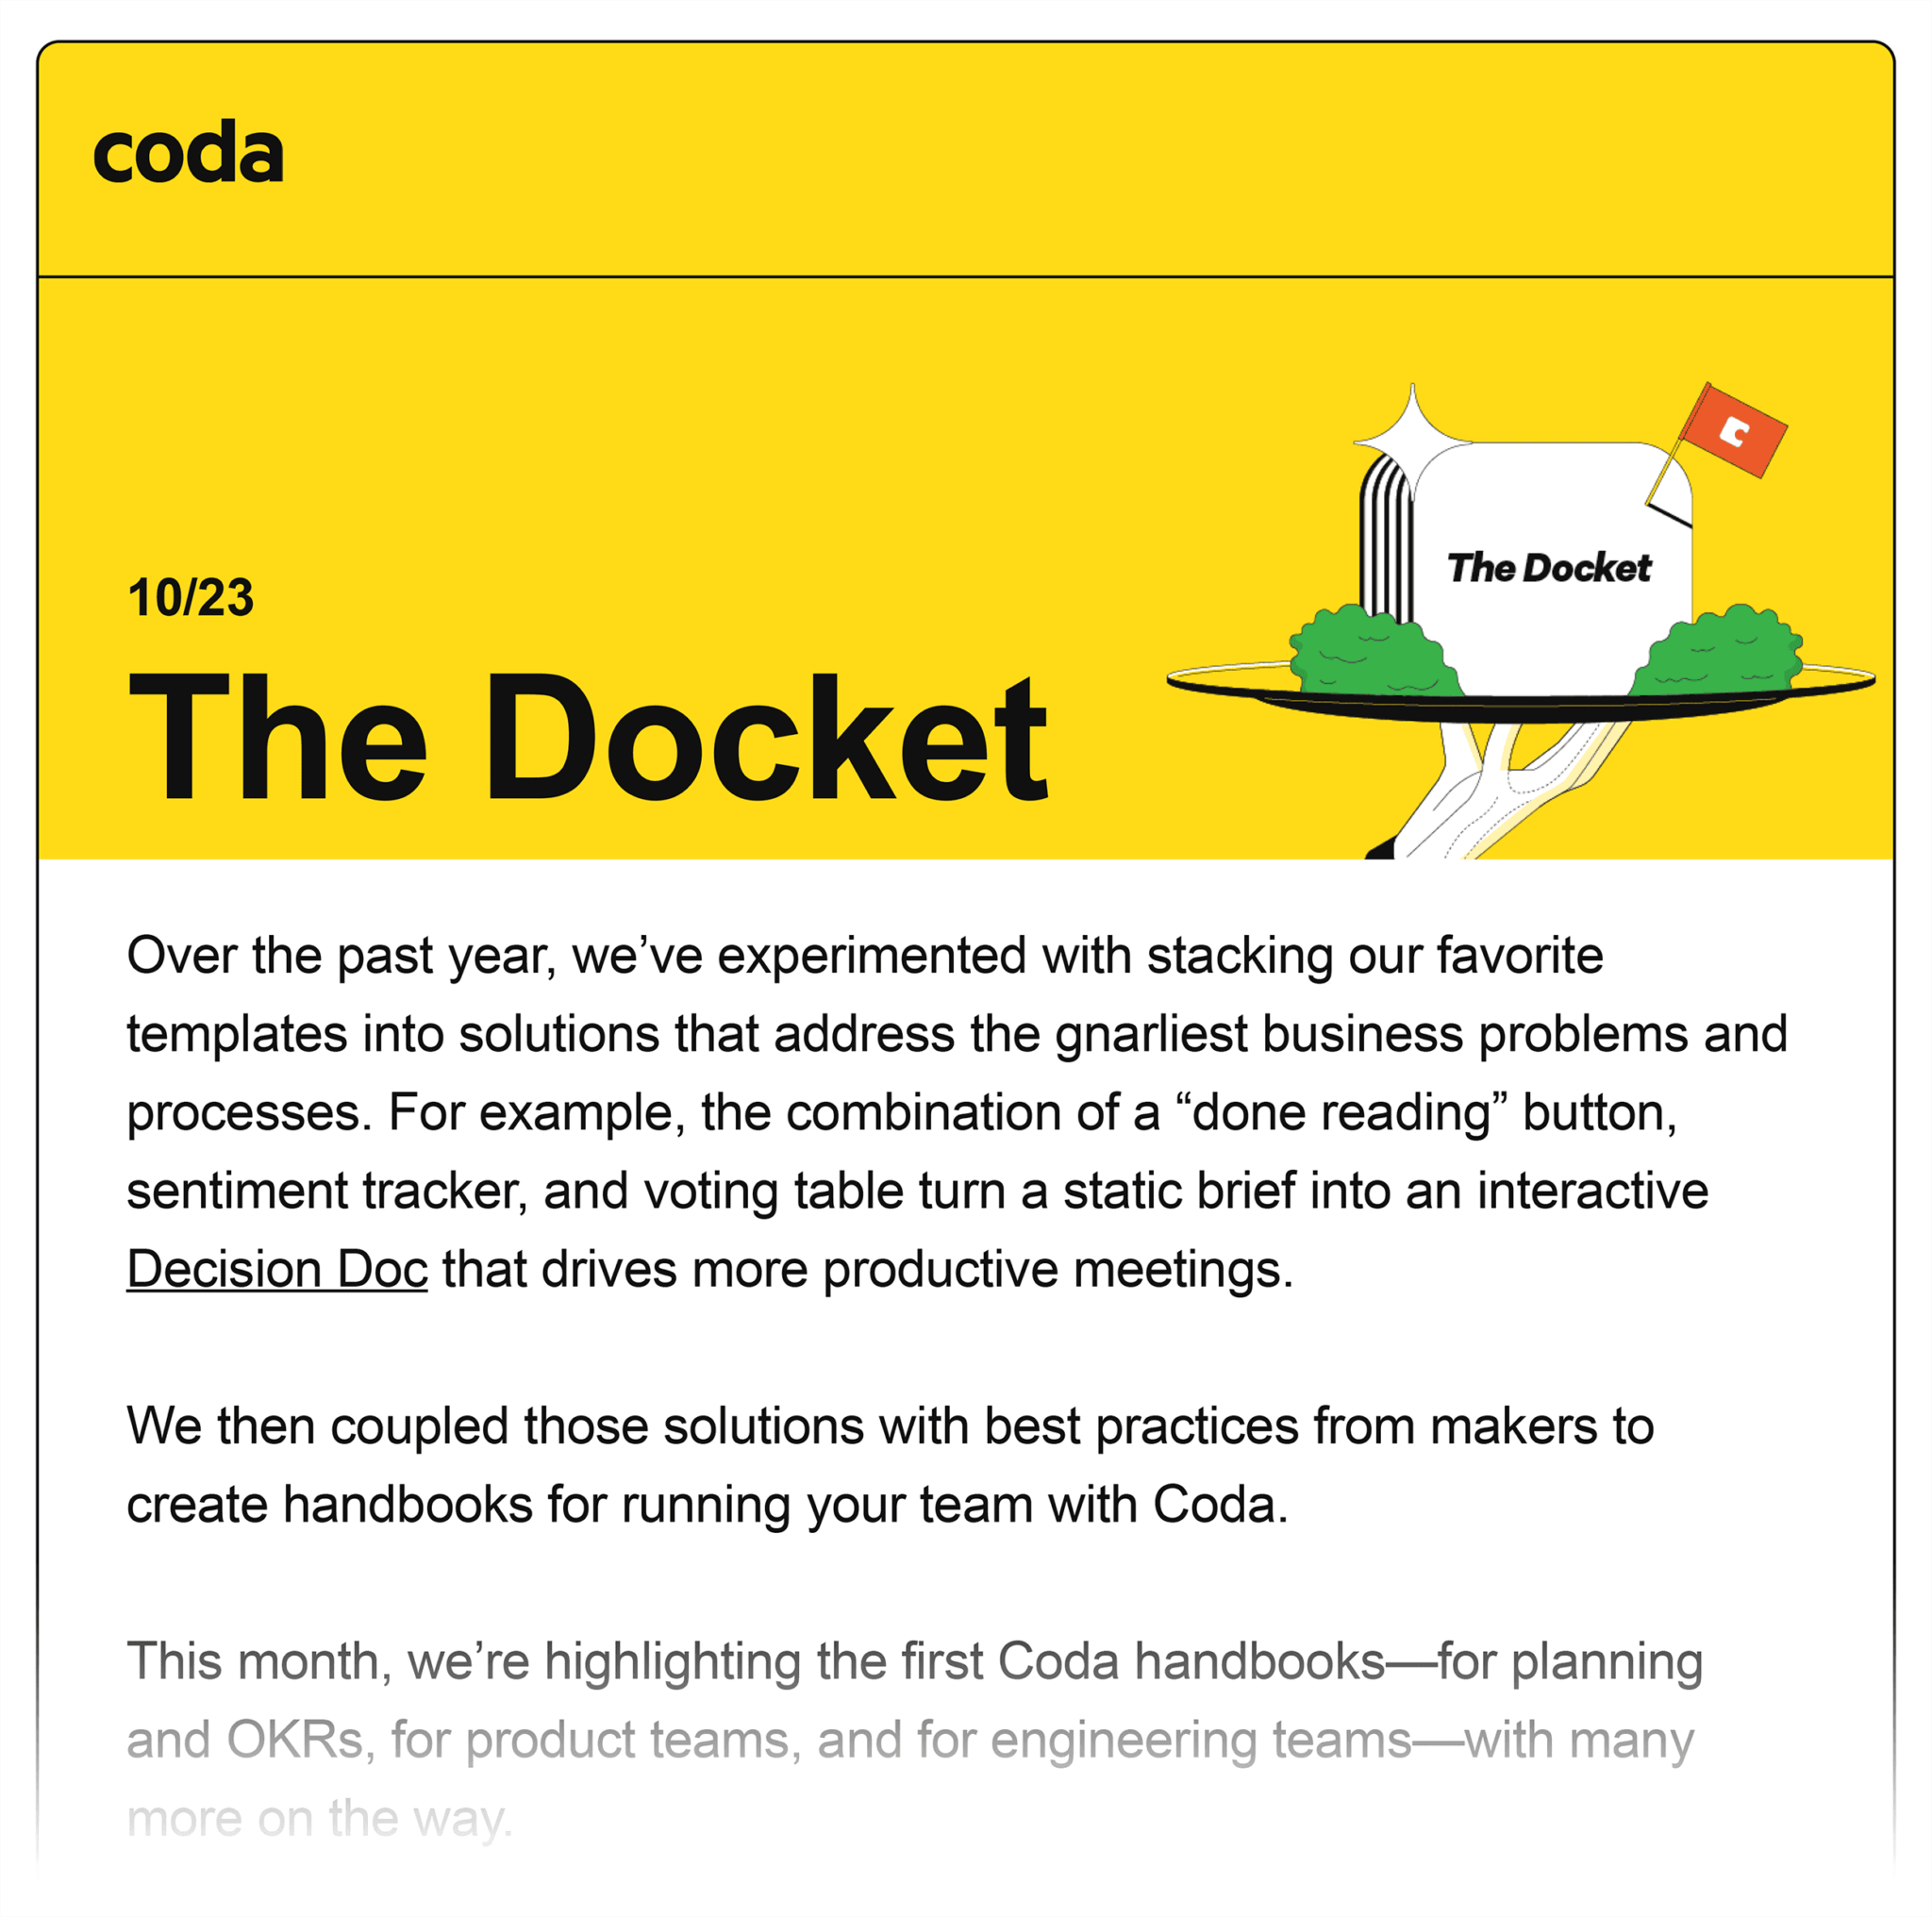 coda-the-docket 22 Content Marketing Examples to Inspire You